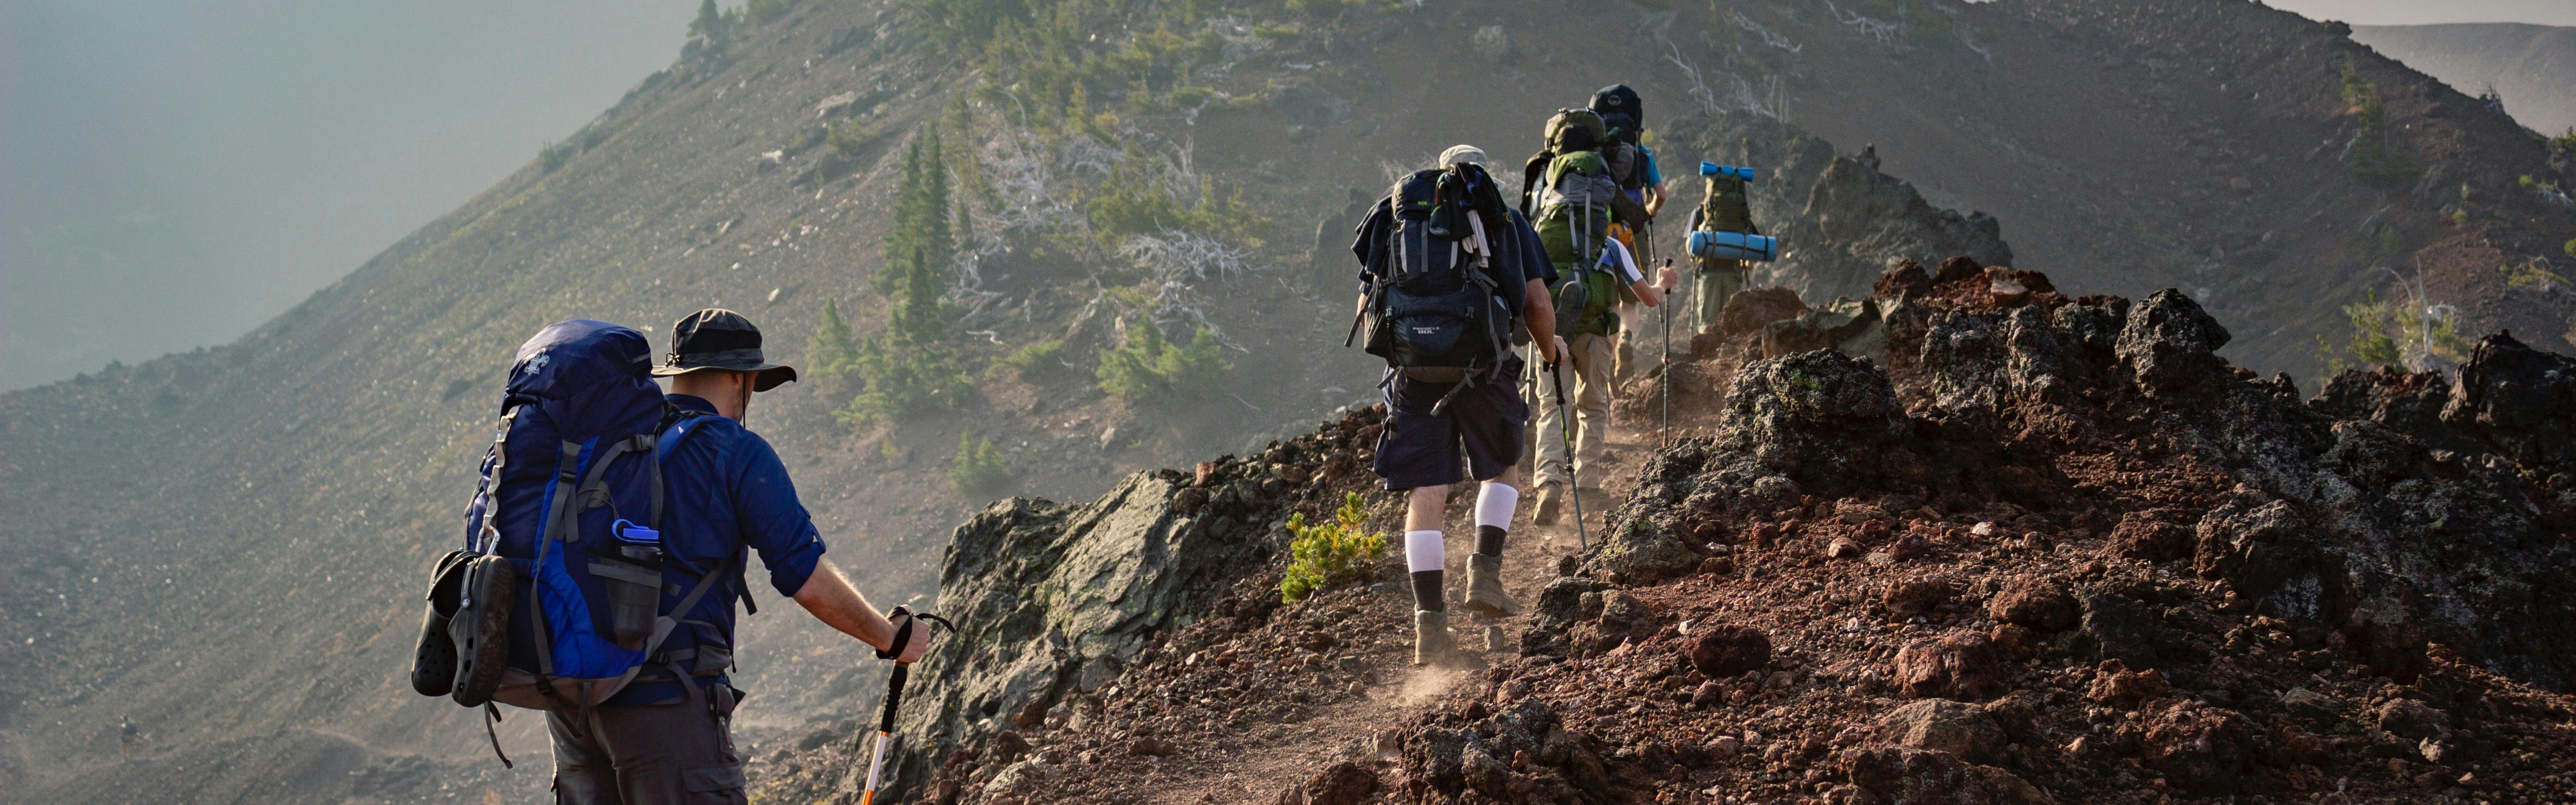 People with large backpacks hike along a dusty ridge